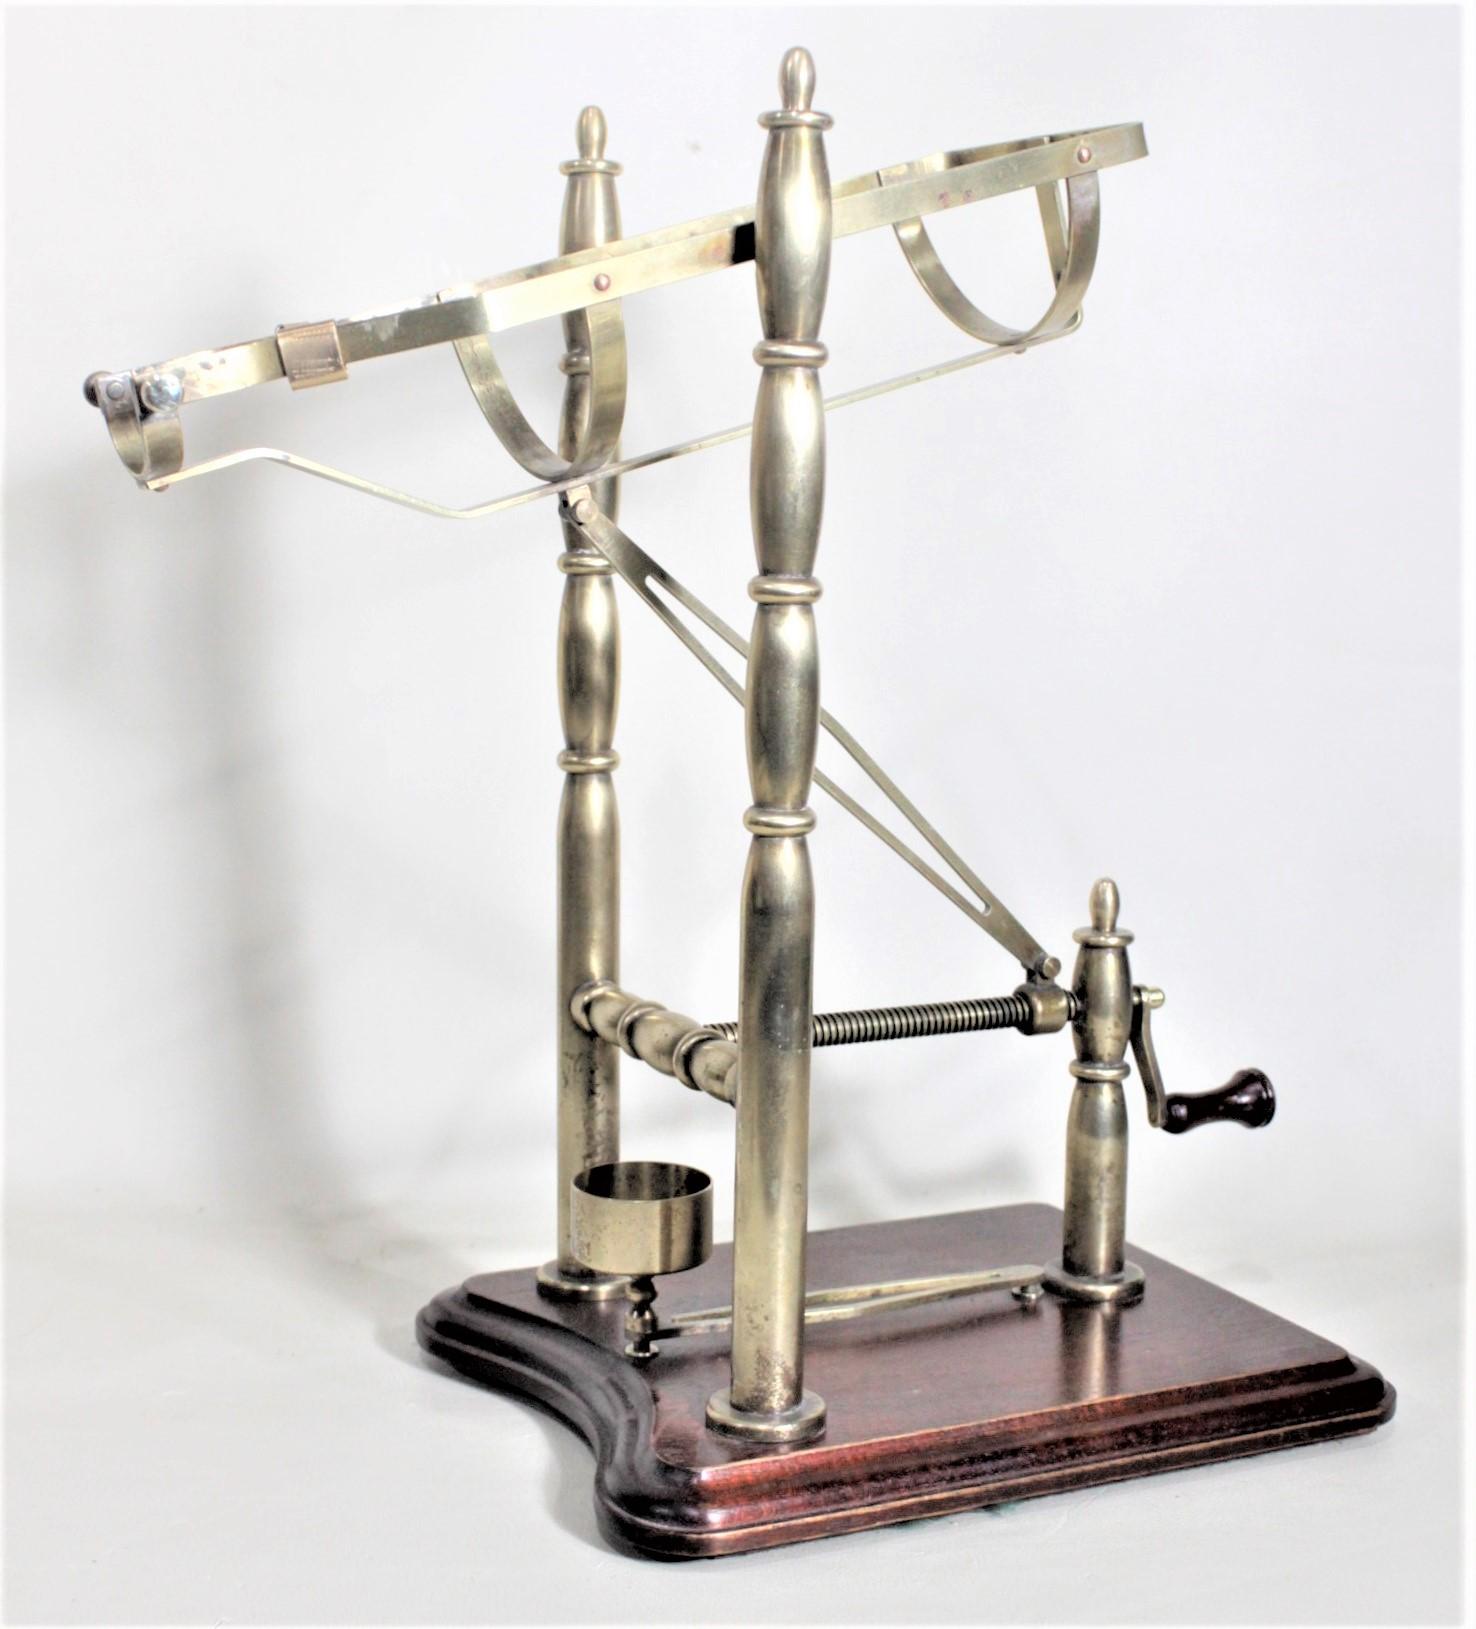 This vintage metal and mahogany port cradle or mechanical wine pourer is unsigned, but presumed to have originated from a European country dating to approximately 1980 and done in a Victorian style. The cradle appears to be composed of a combination